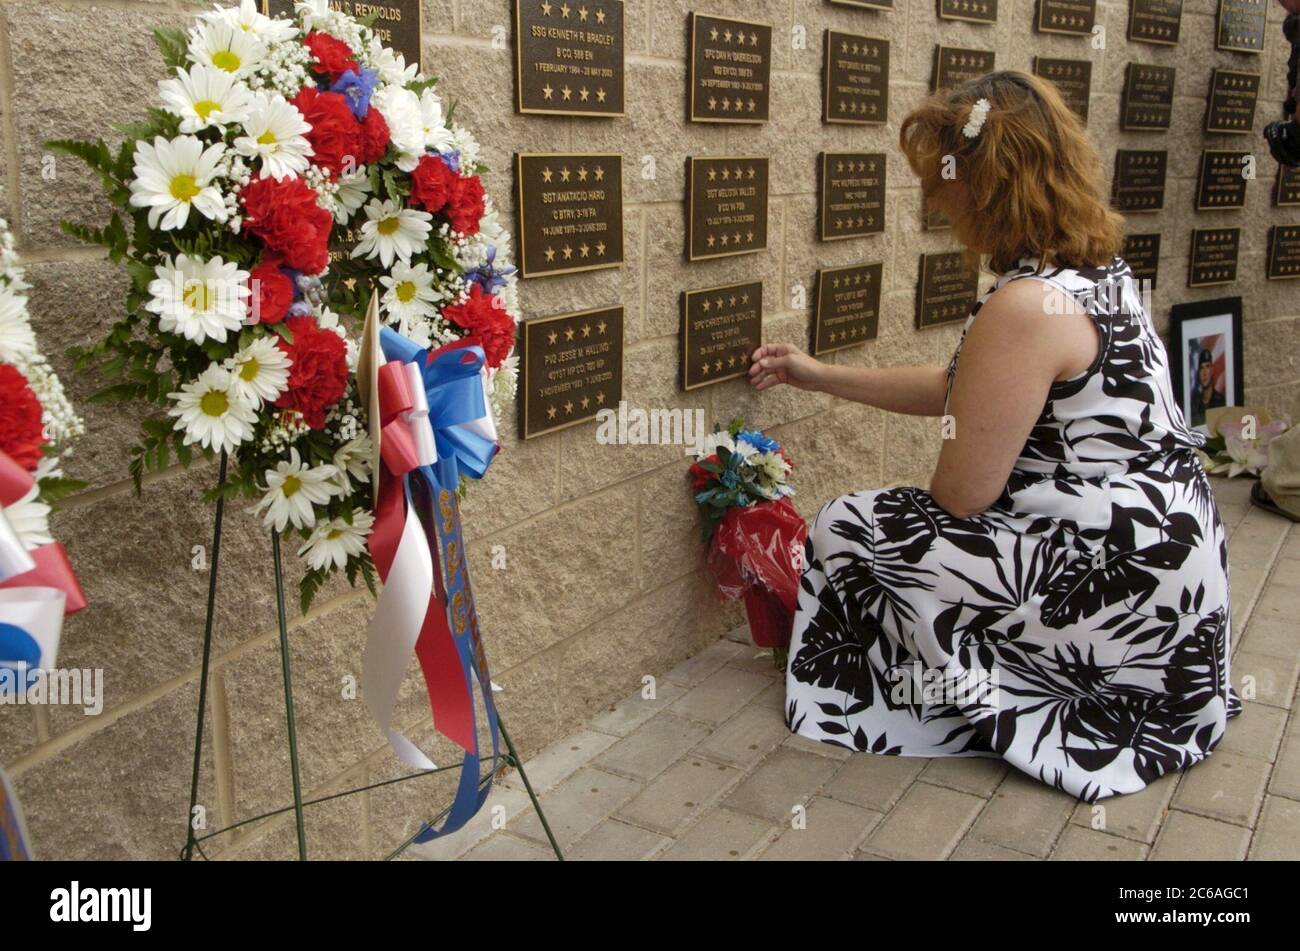 Fort Hood, Texas USA, September 2 2004: Emmy Schulz of Dallas touches the plaque commemorating her son, Christian C. Schulz, who was one of 100 soldiers from Fort Hood killed in Operation Iraqi Freedom.  ©Bob Daemmrich Stock Photo